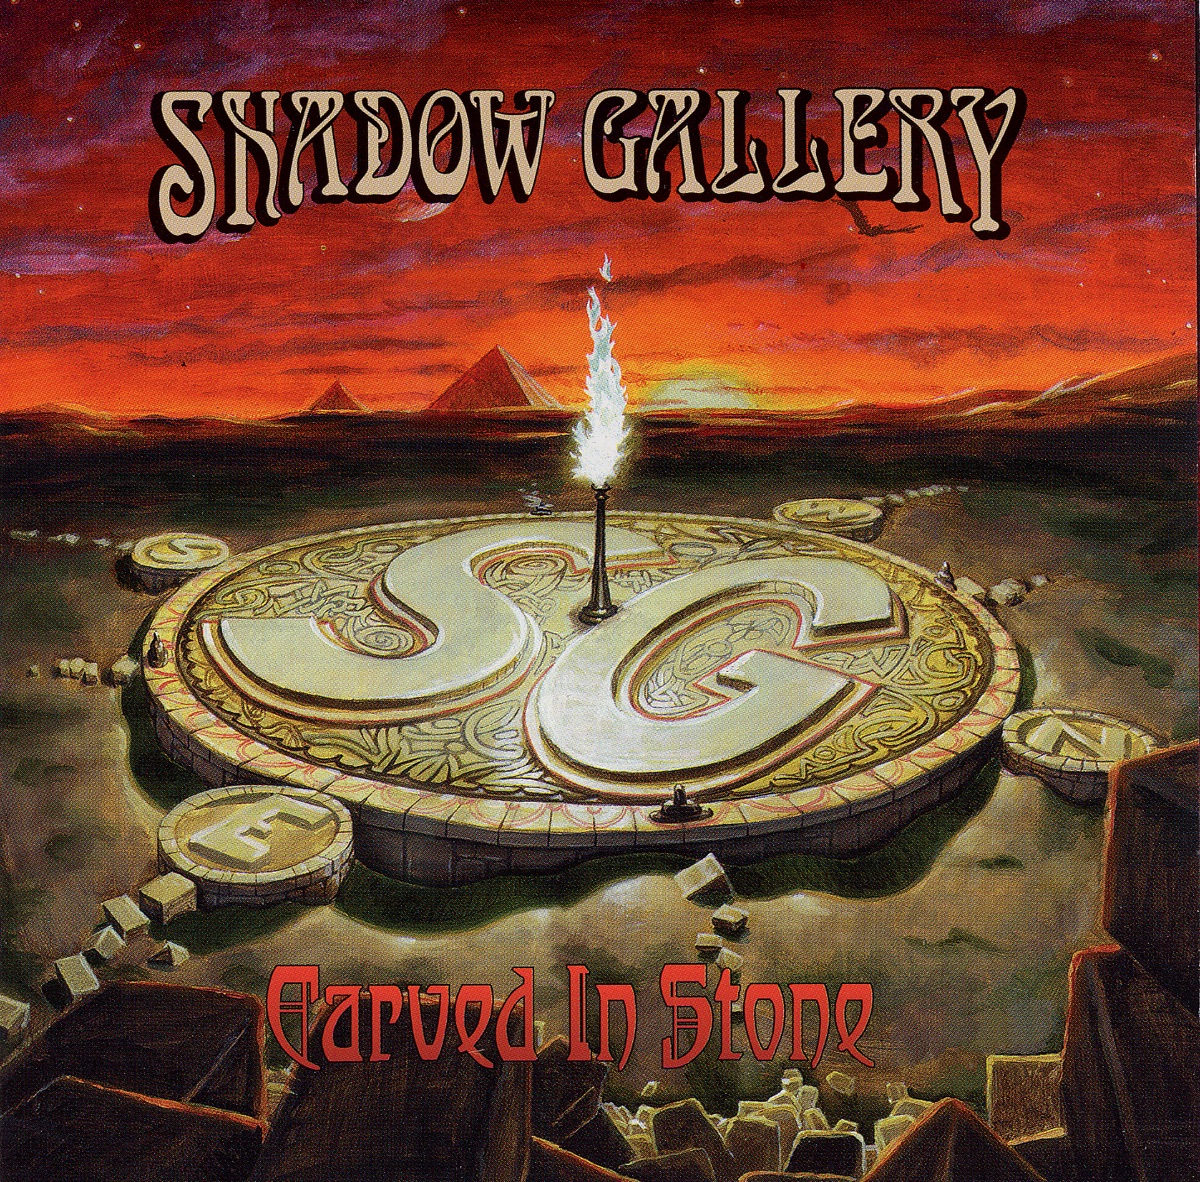 Carved In Stone by Shadow Gallery